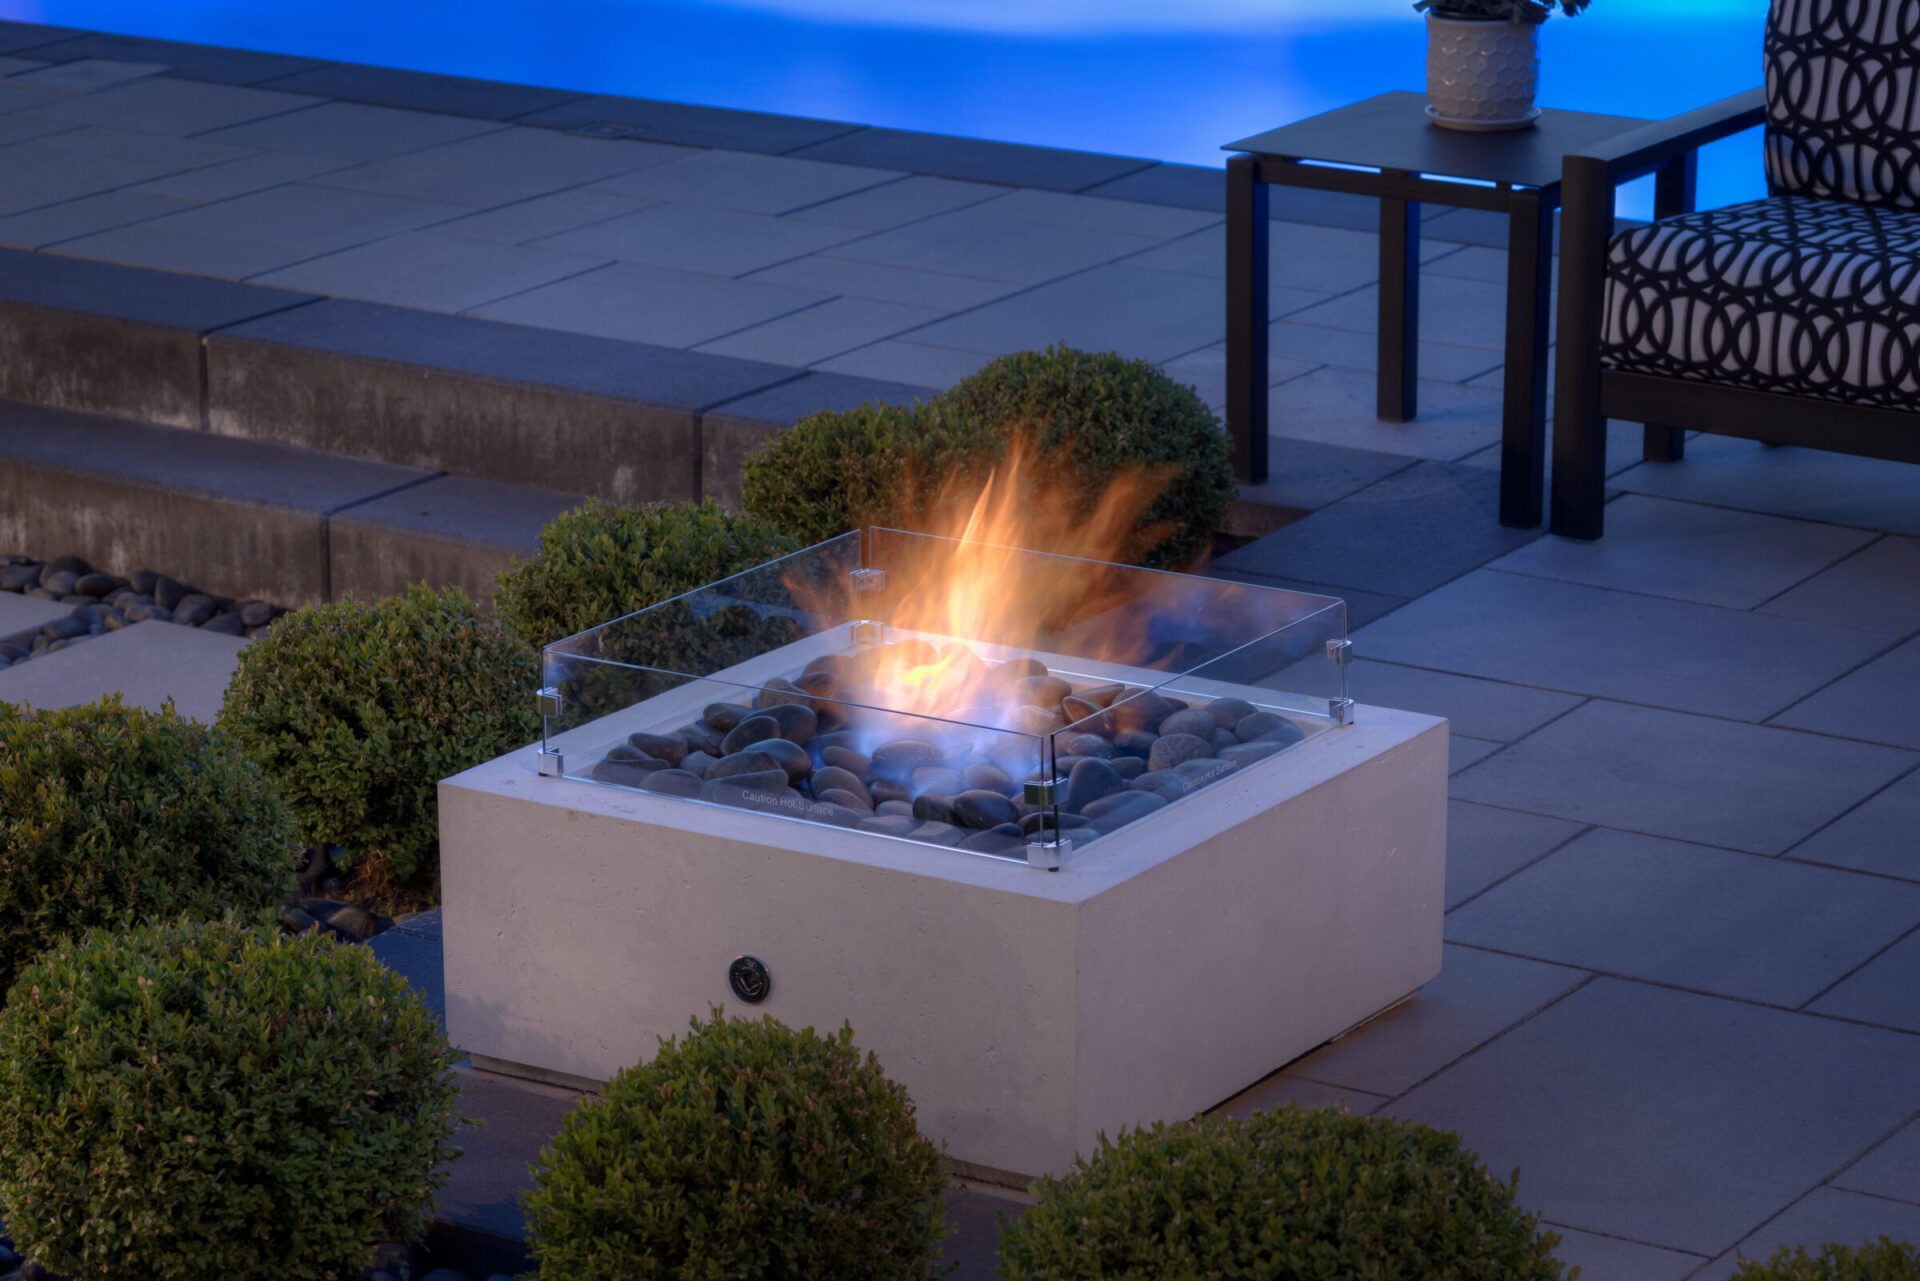 An outdoor glass-enclosed fire pit with a lively flame burns atop smooth stones. Nearby are bushes, a side table, and a patterned armchair. Evening ambiance.